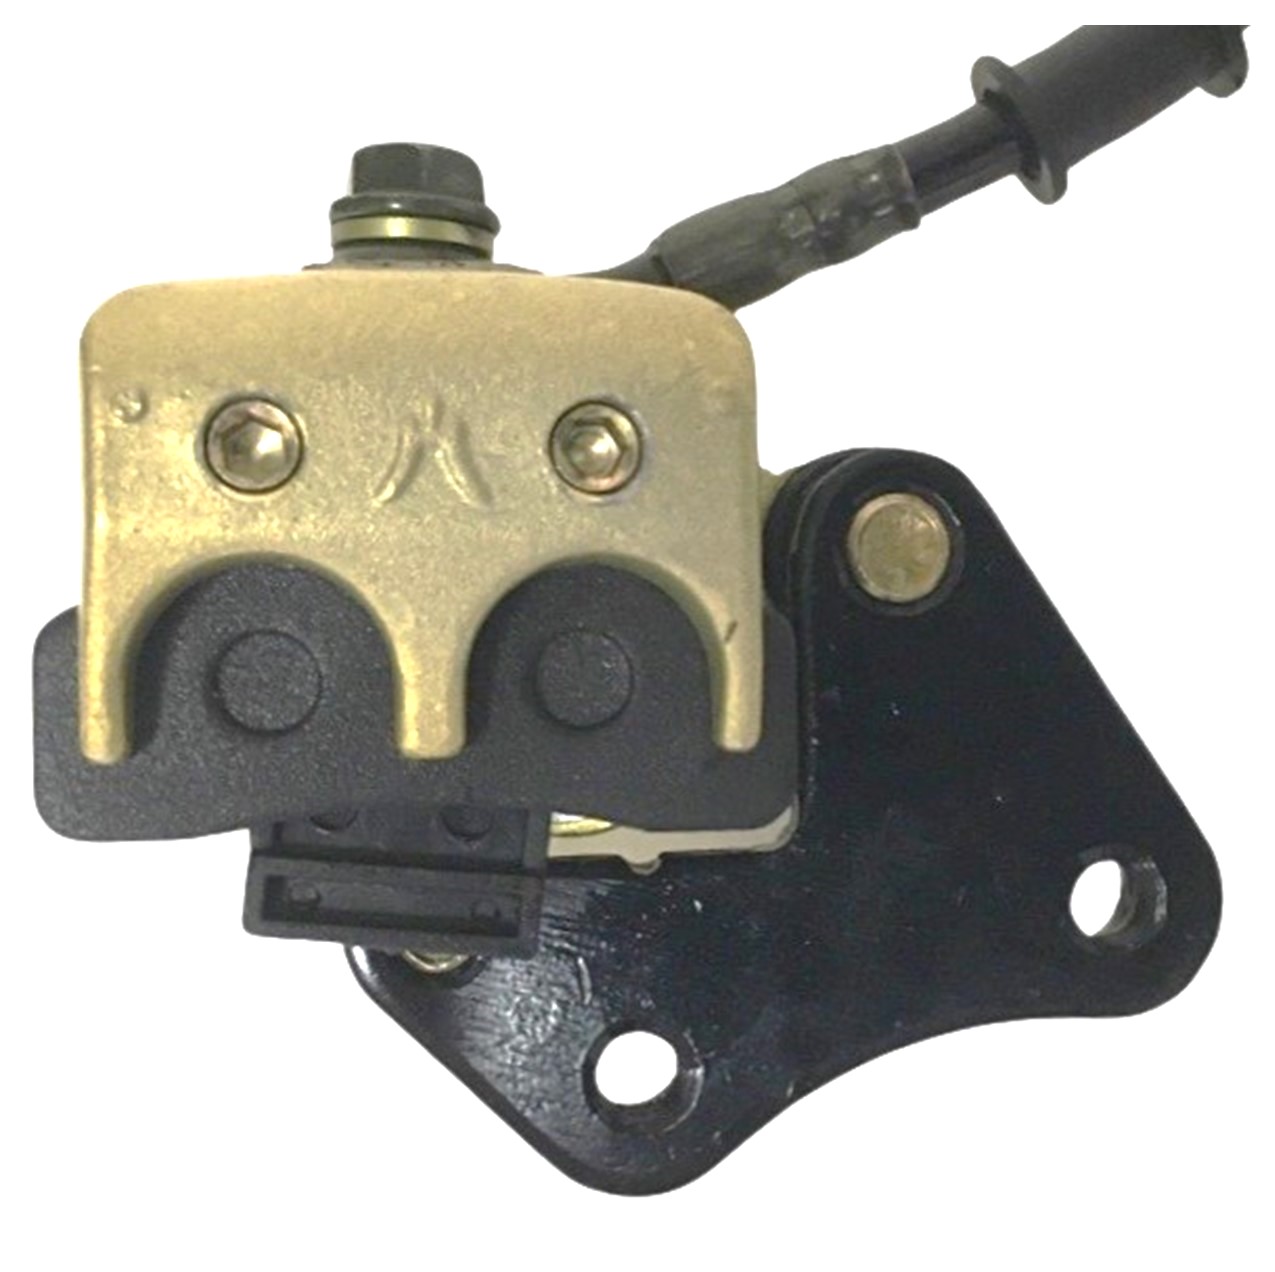 Front Brake Assembly Fits Many DirtBikes Caliper Bolts c/c=44mm, Line Length=38in